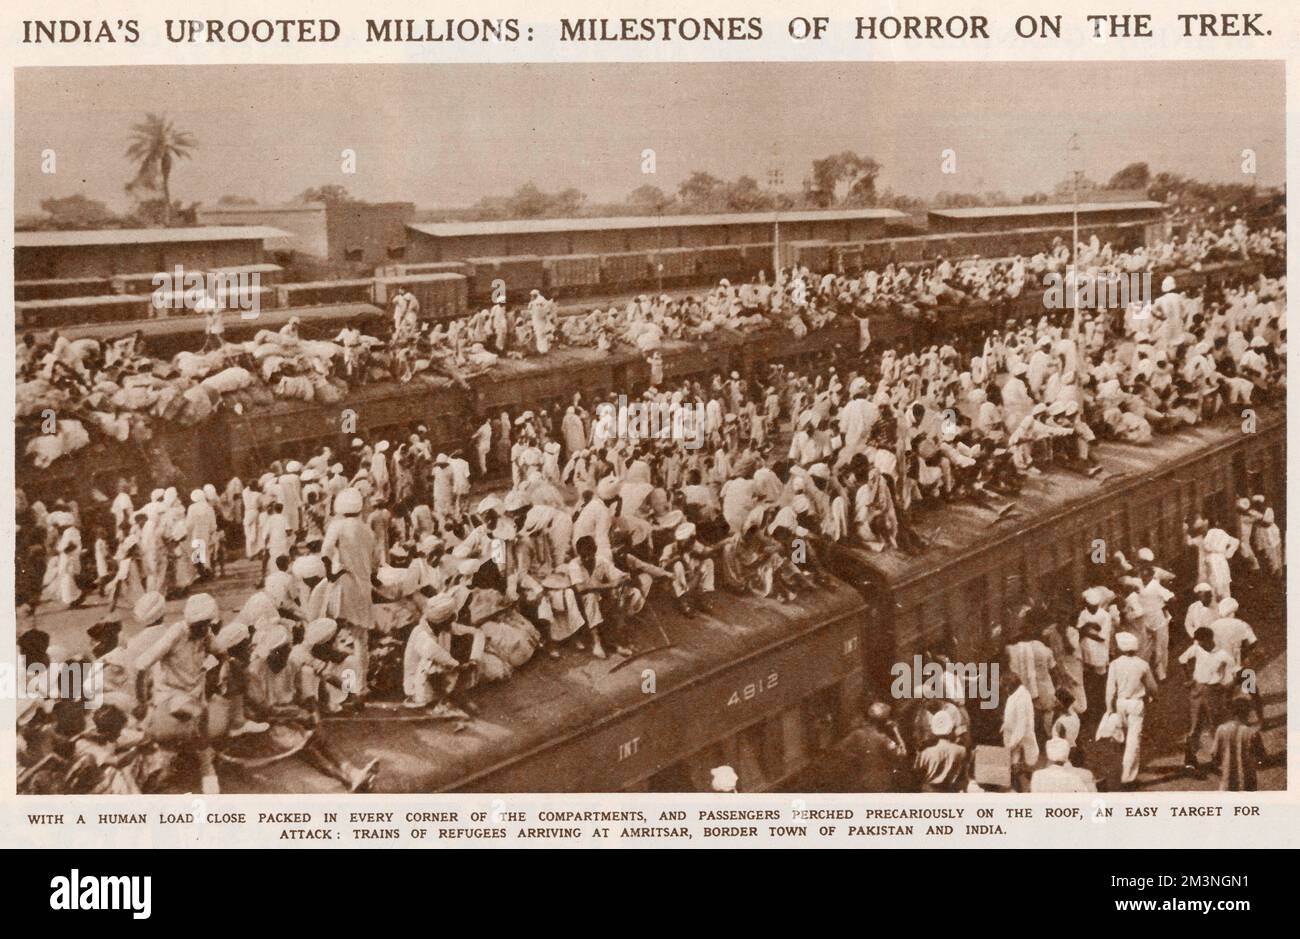 Crowded trains of refugees arriving at Amritsar, border town on Pakistan and India, following the Partition.  1947 Stock Photo